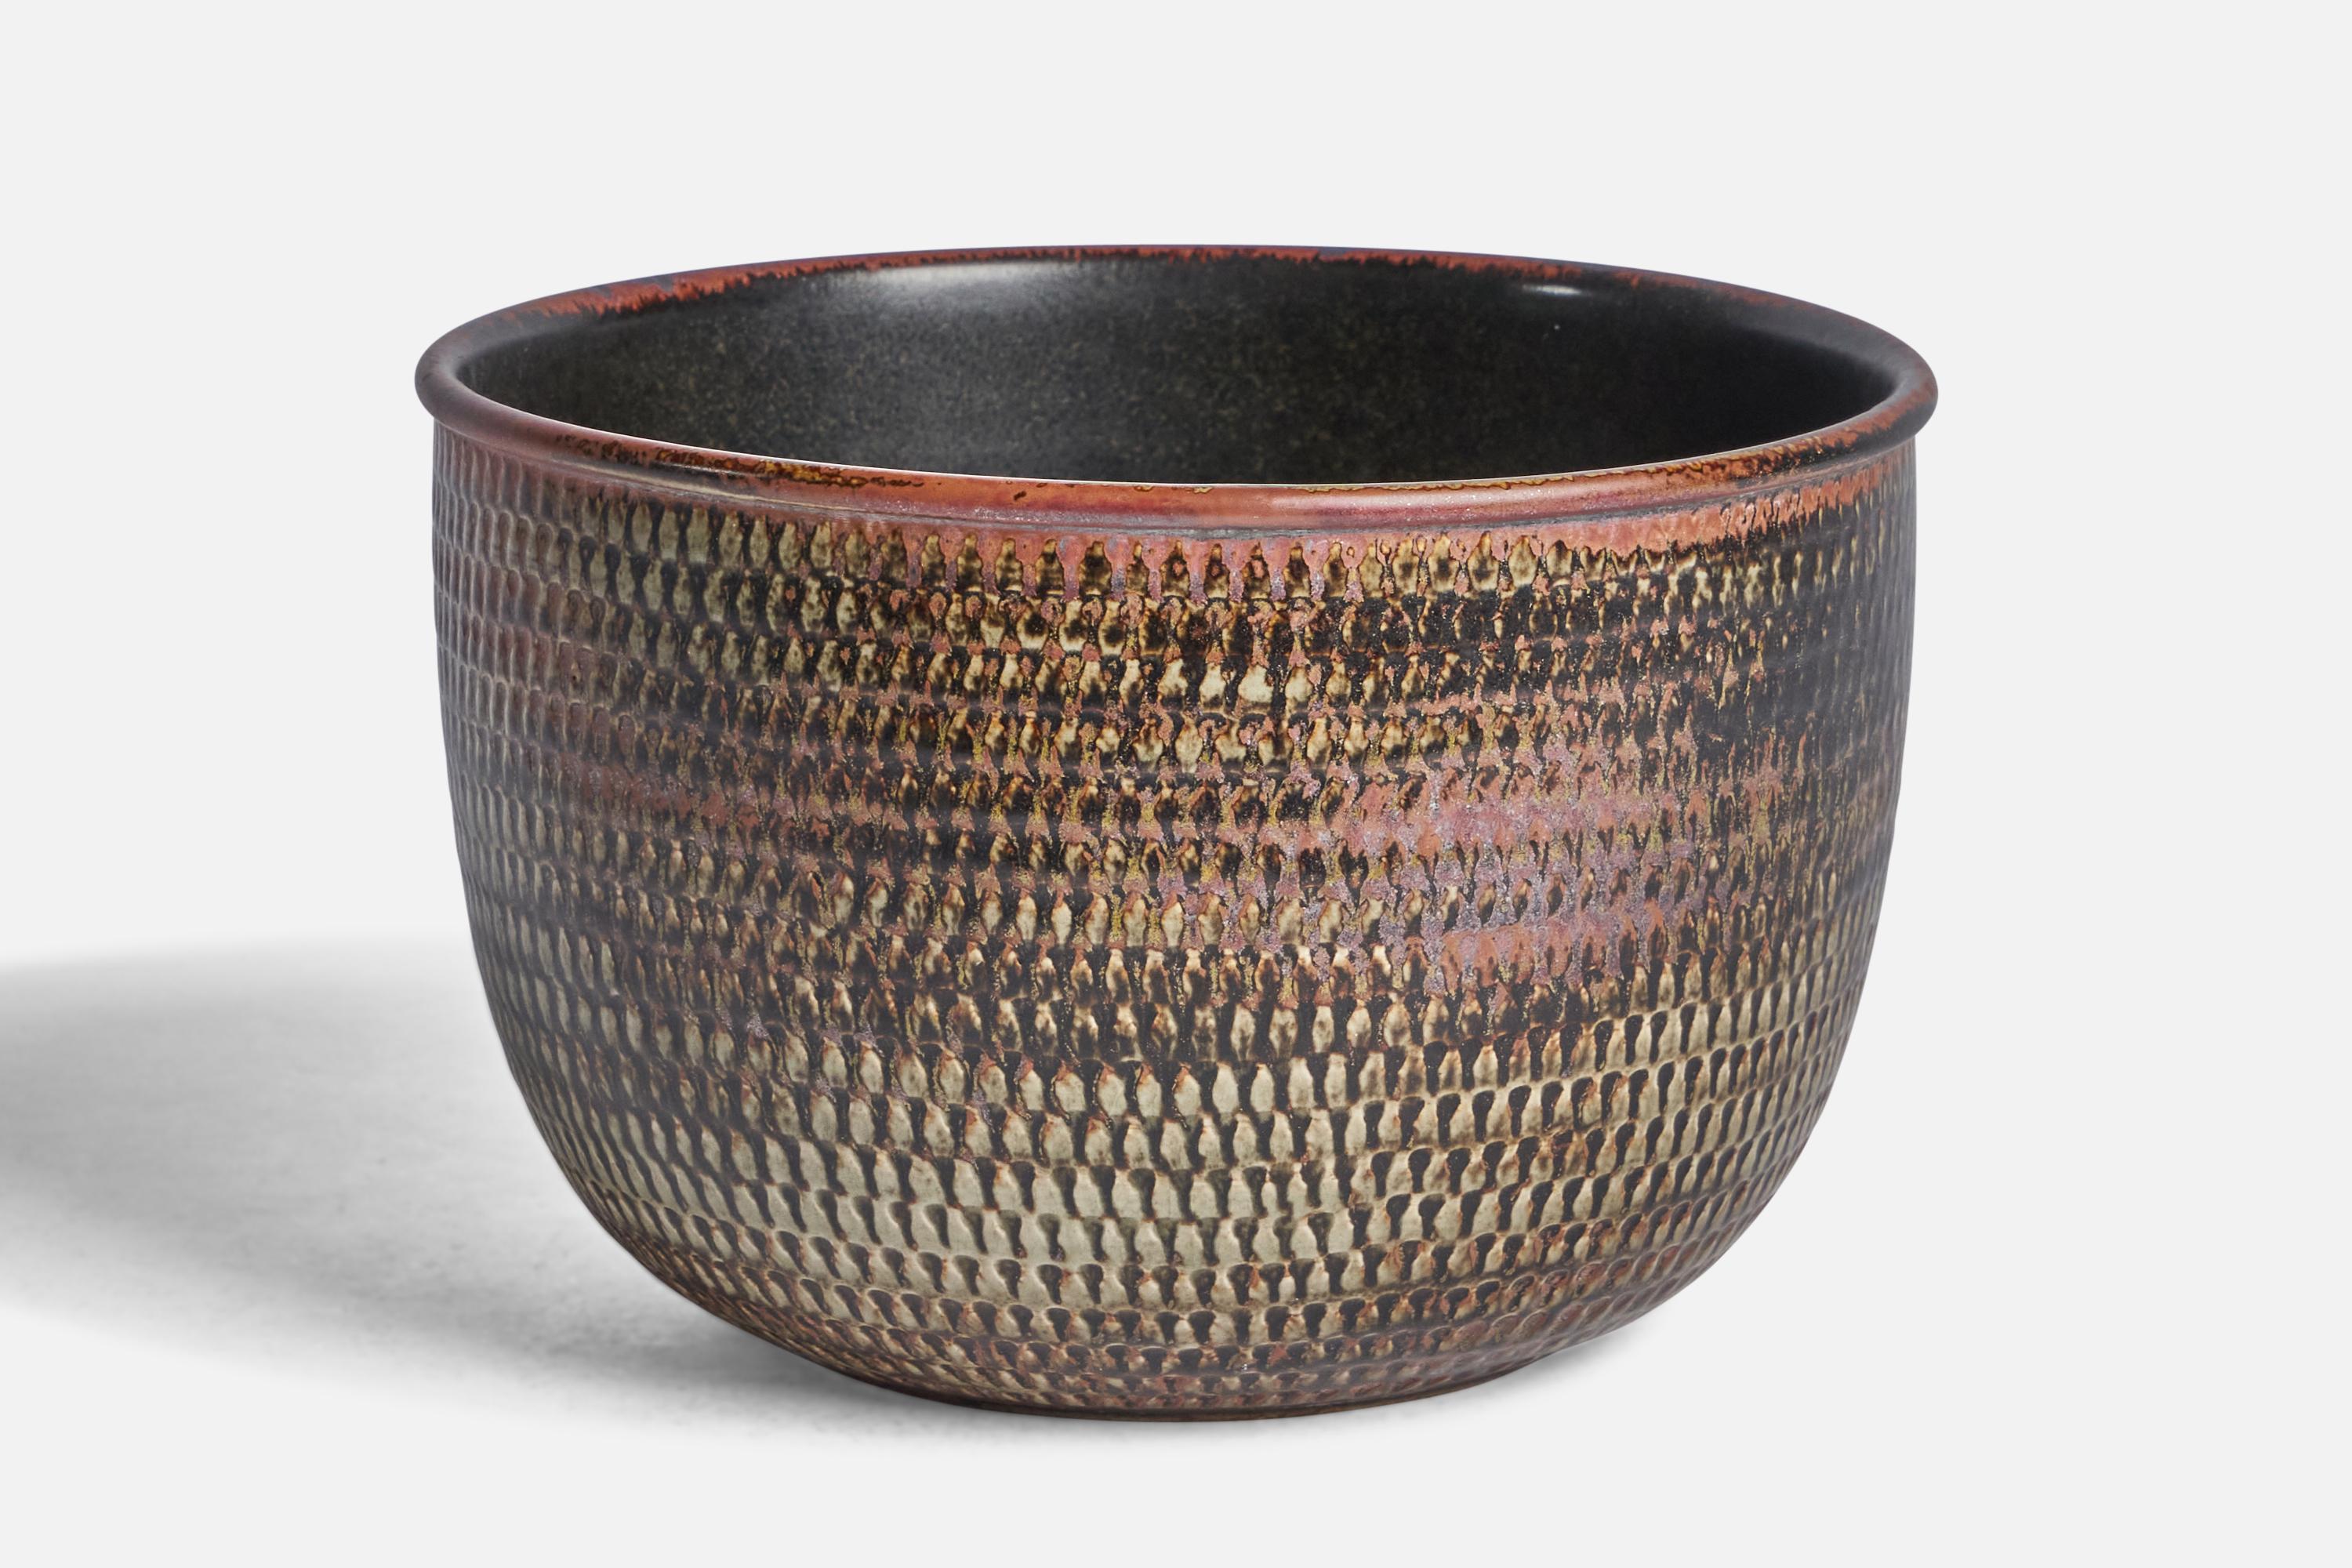 A red, black and beige-glazed incised stoneware bowl designed by Stig Lindberg and produced by Gustavsberg, Sweden, c. 1950s.